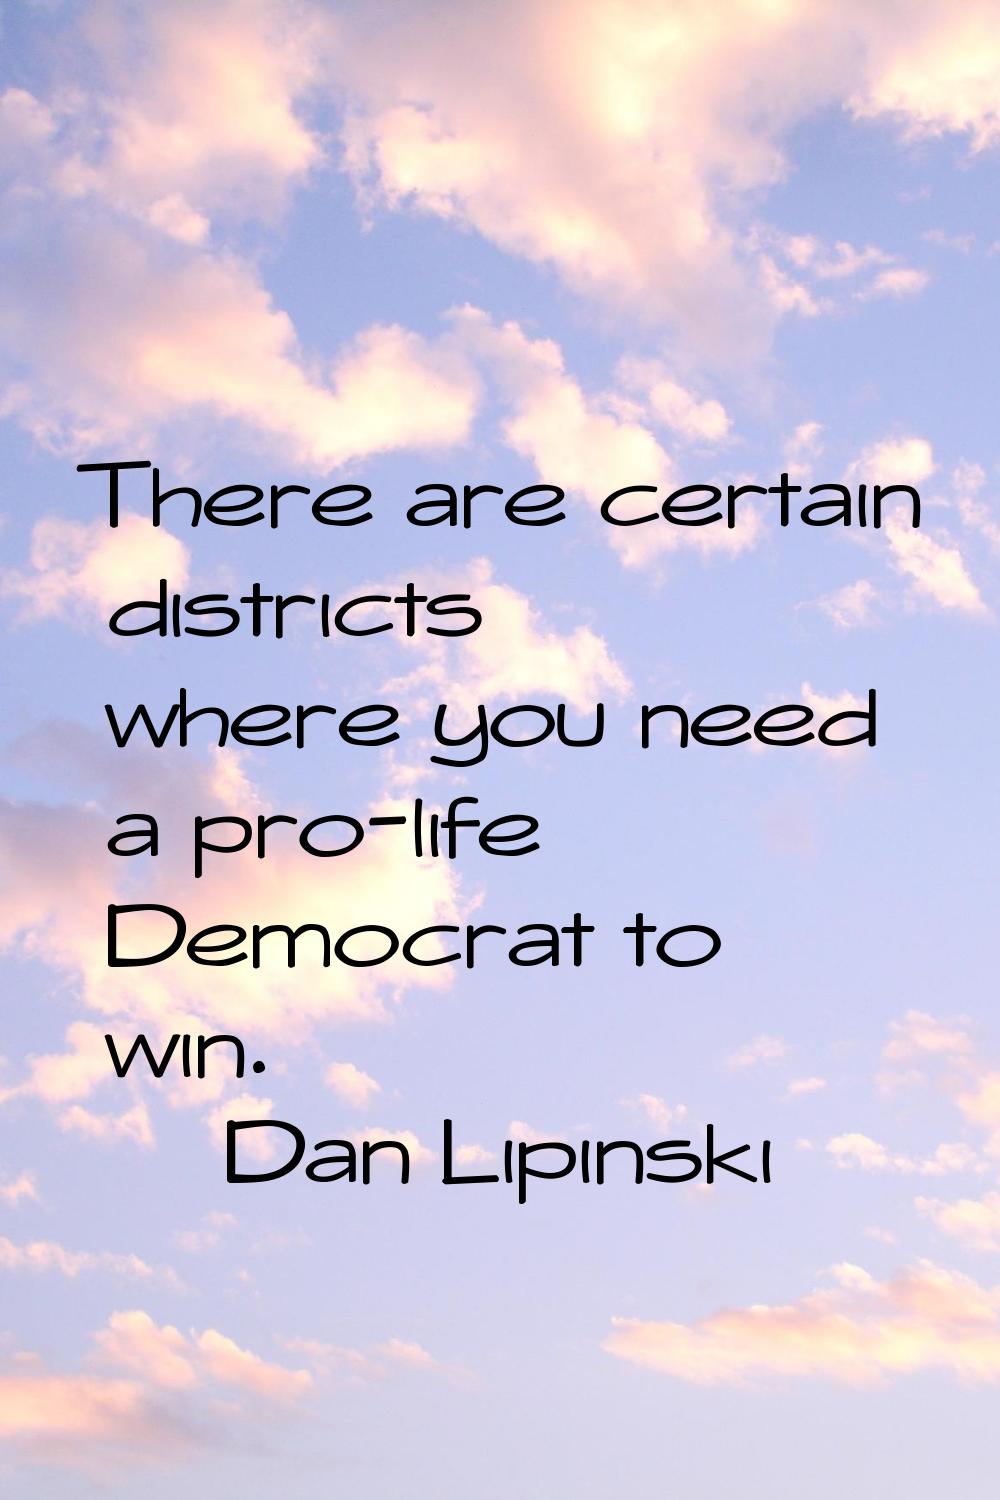 There are certain districts where you need a pro-life Democrat to win.